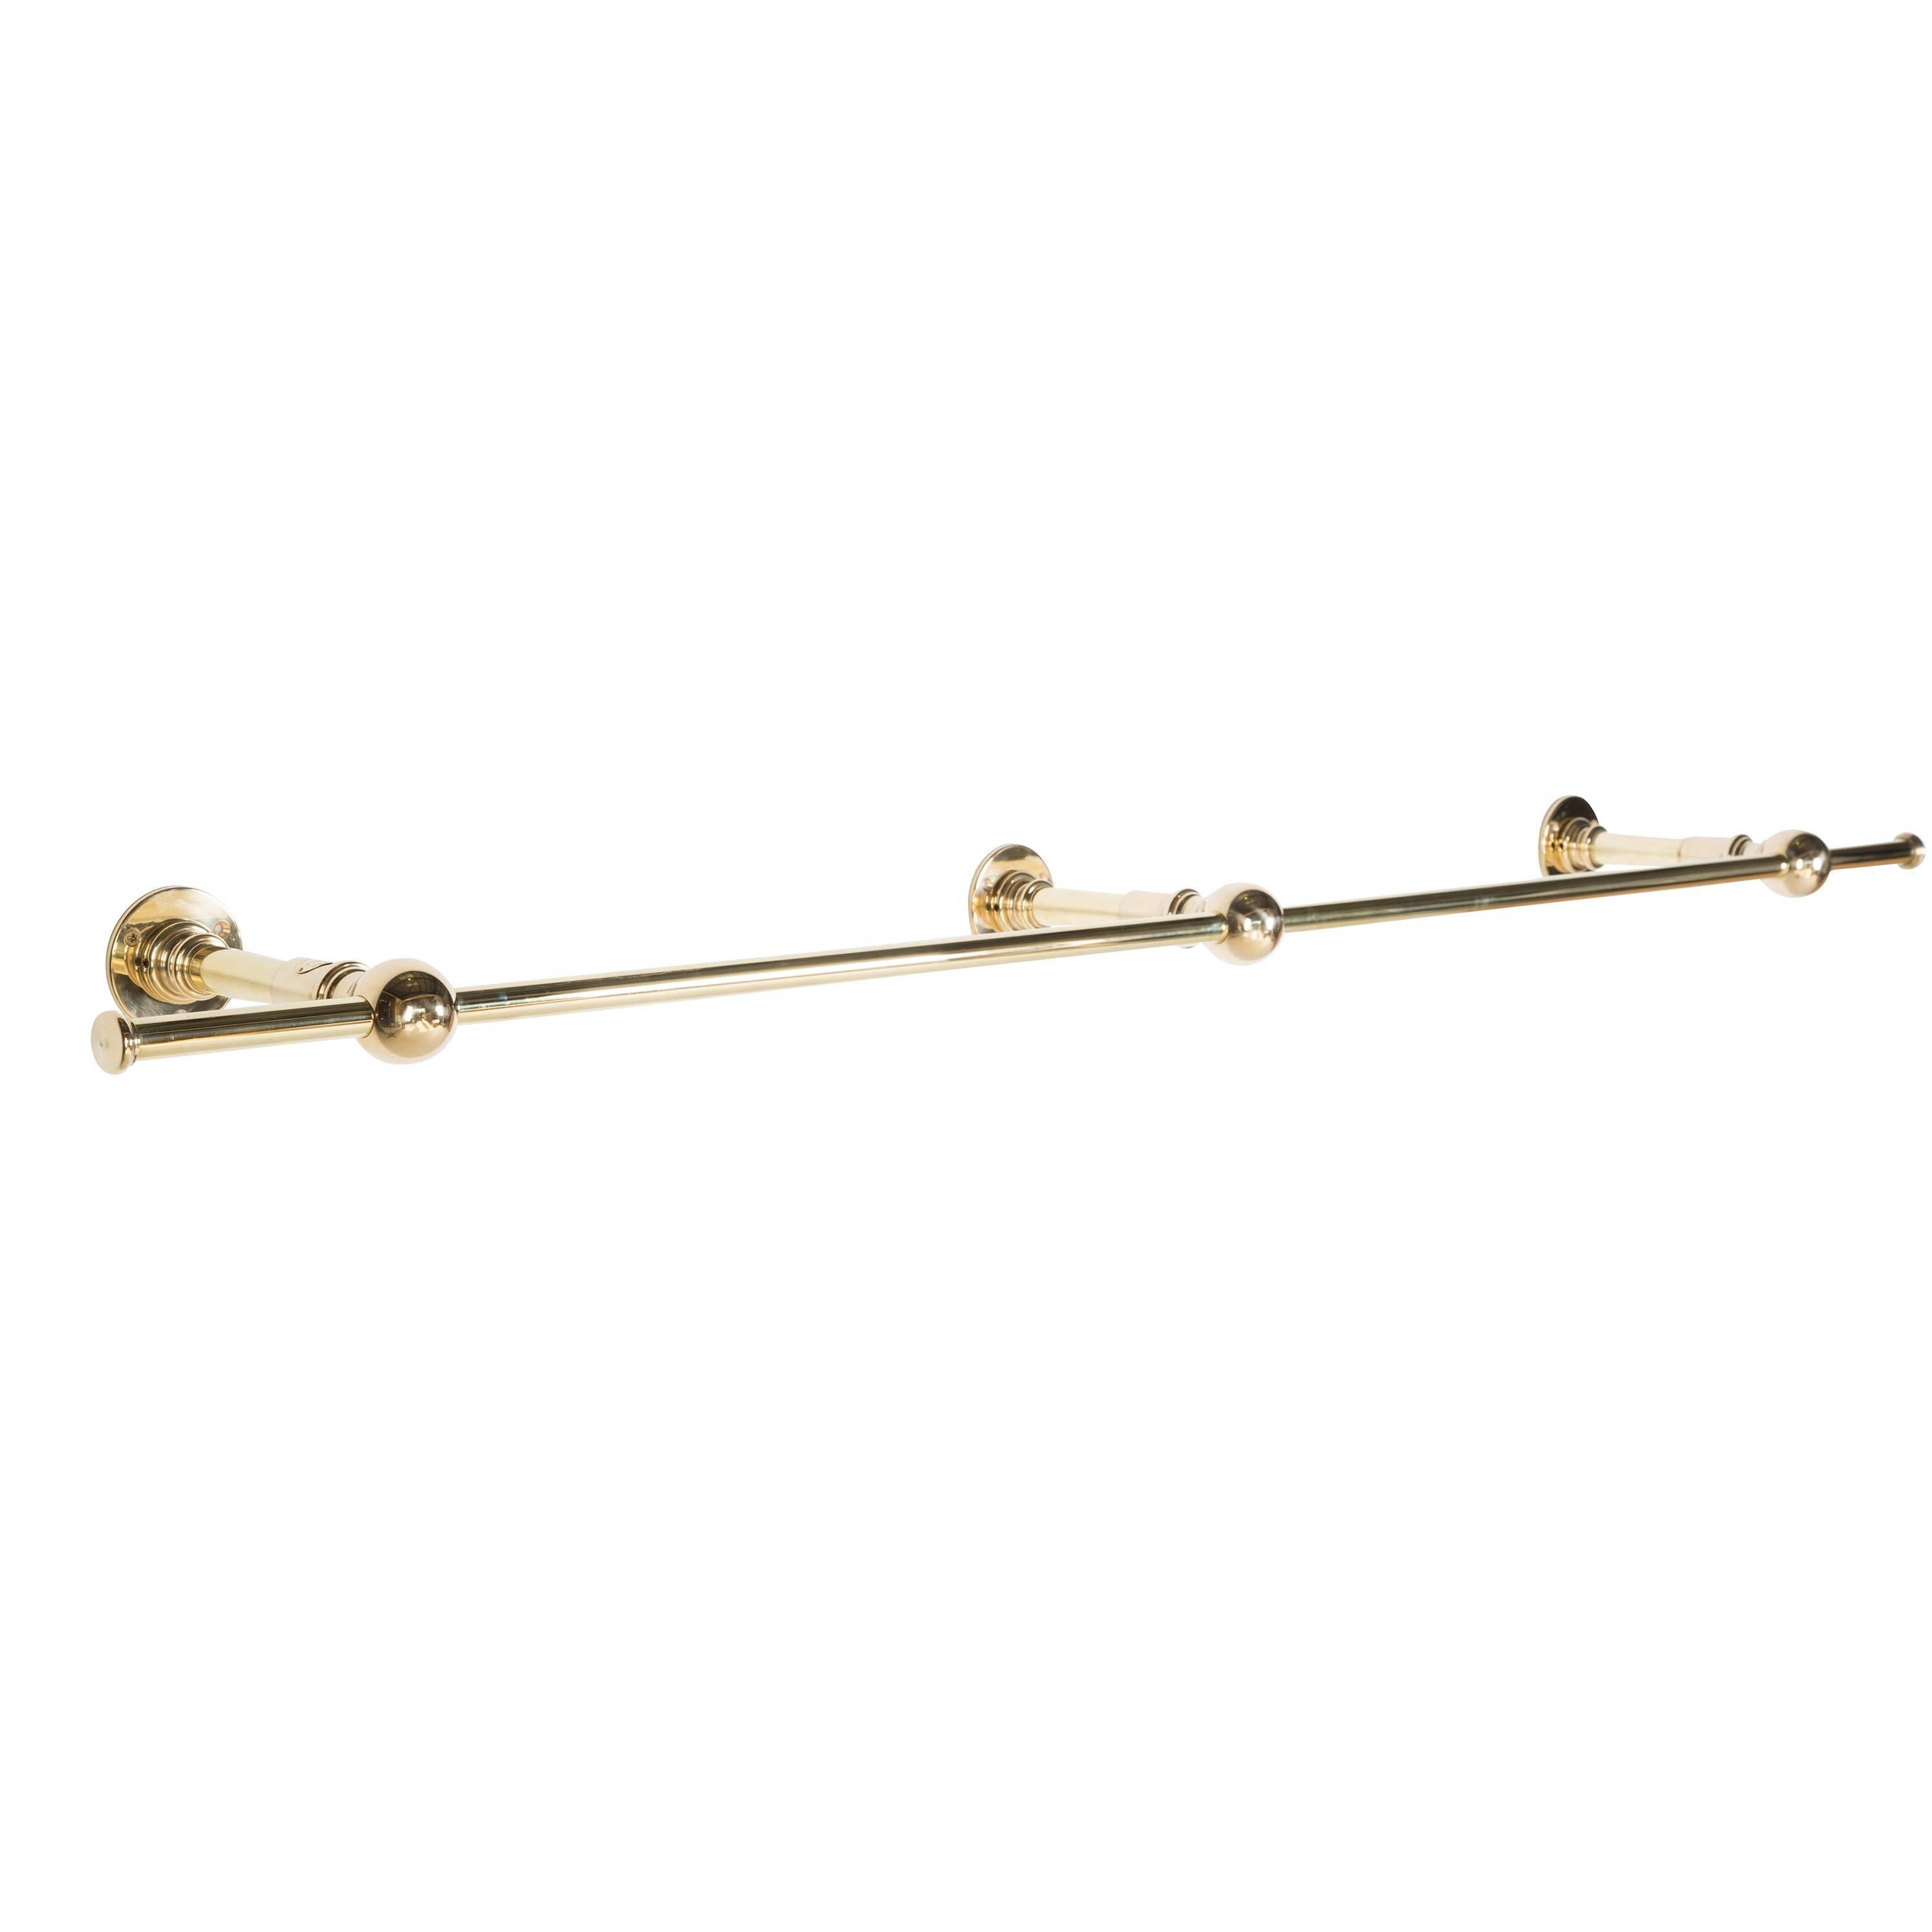 A vintage style wall-mounted clothes rail, with a triple wall fixing point. This clothes rail is tailor made to order from the finest quality polished brass in our workshop in England. No trade discount. Please note that bespoke sizes and metal